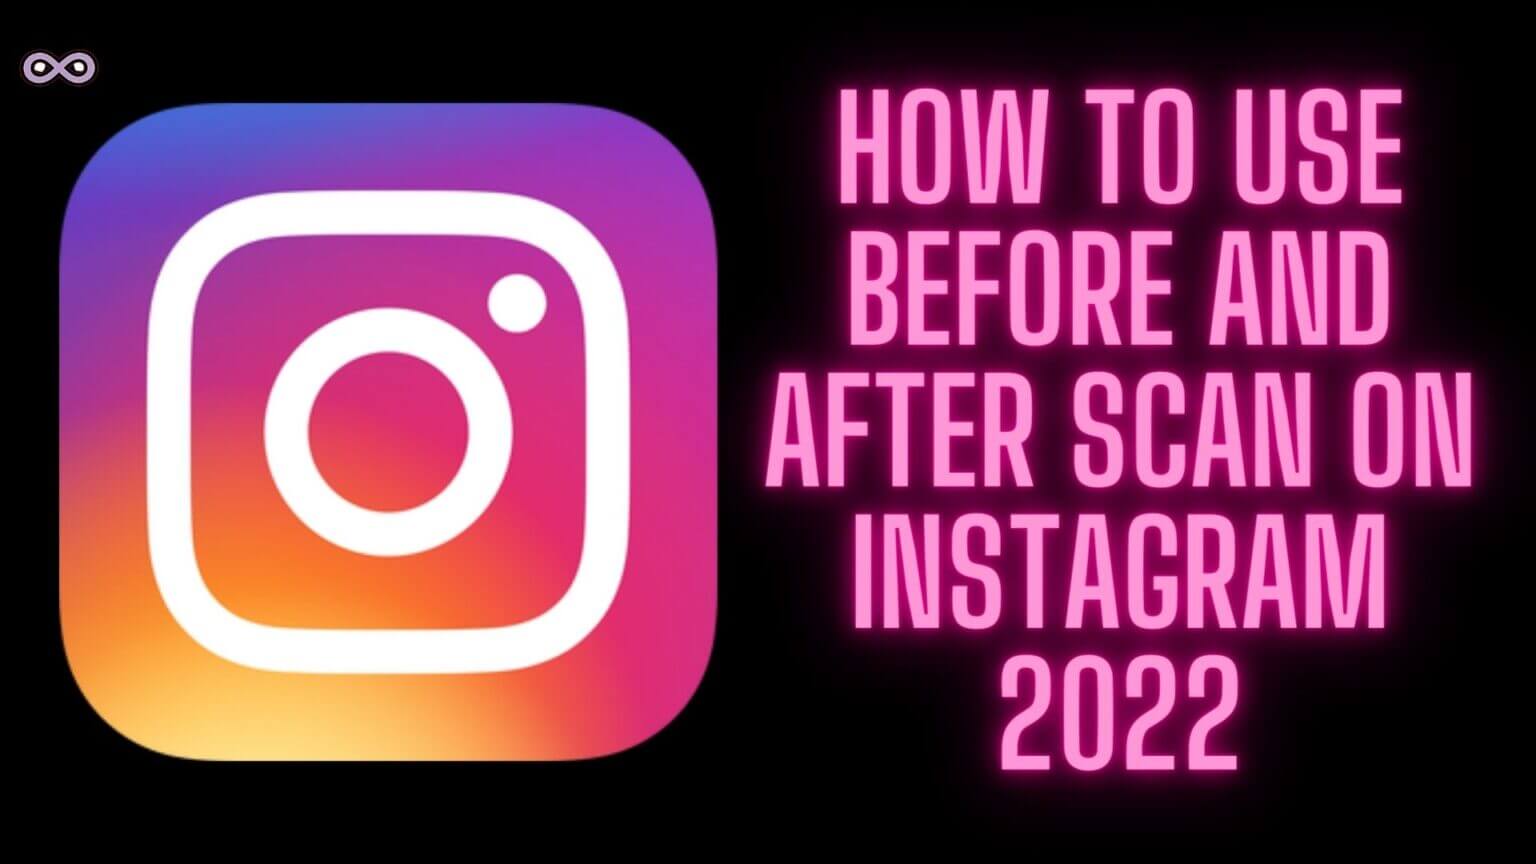 Instagram before and after scanning